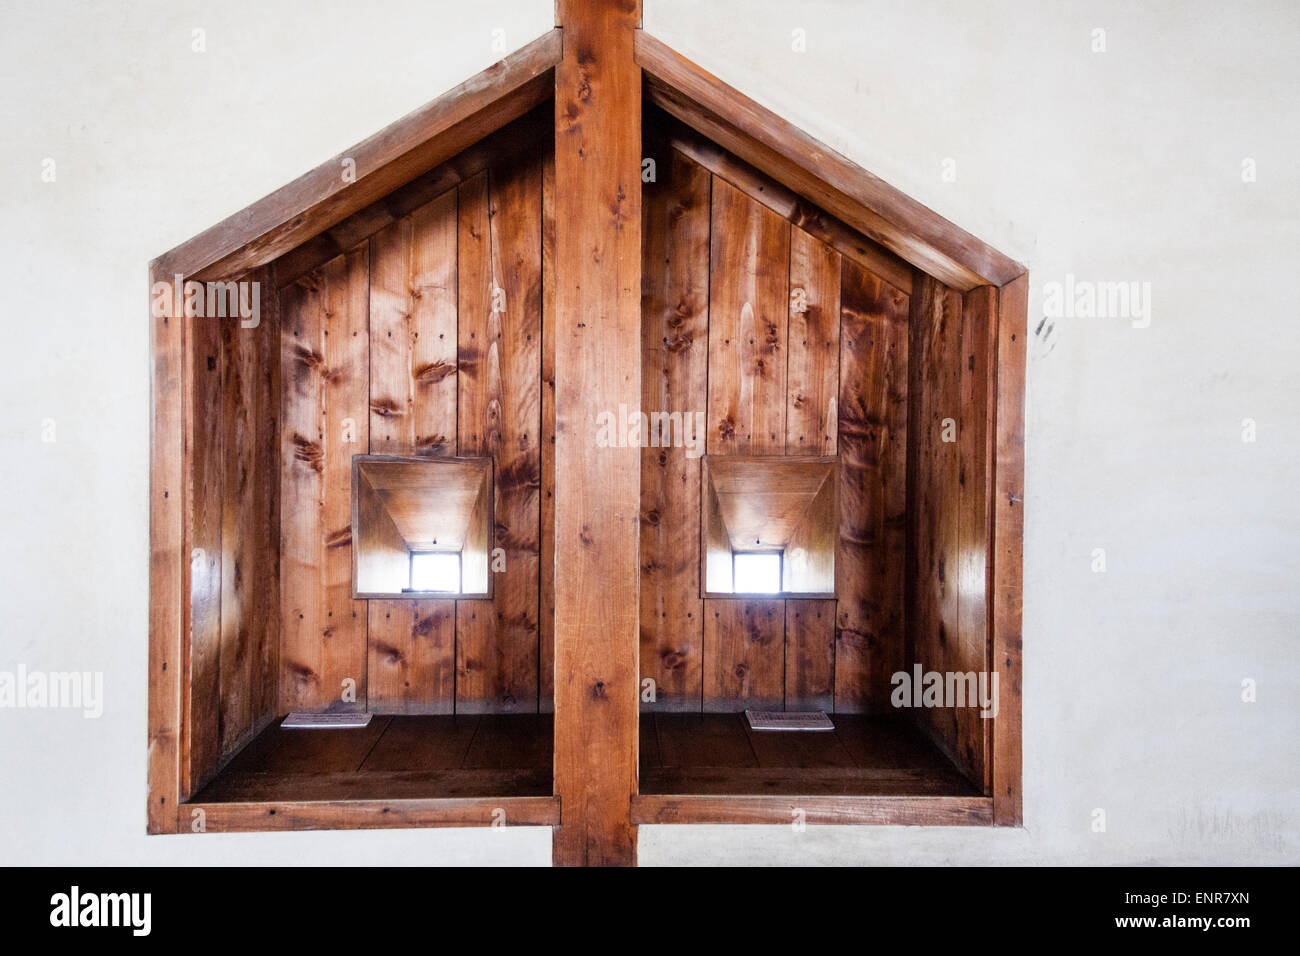 Japan, Iyo Matsuyama castle. Double gun port, sama, in wall of keep. Wooden frame with two ports side by side. Stock Photo